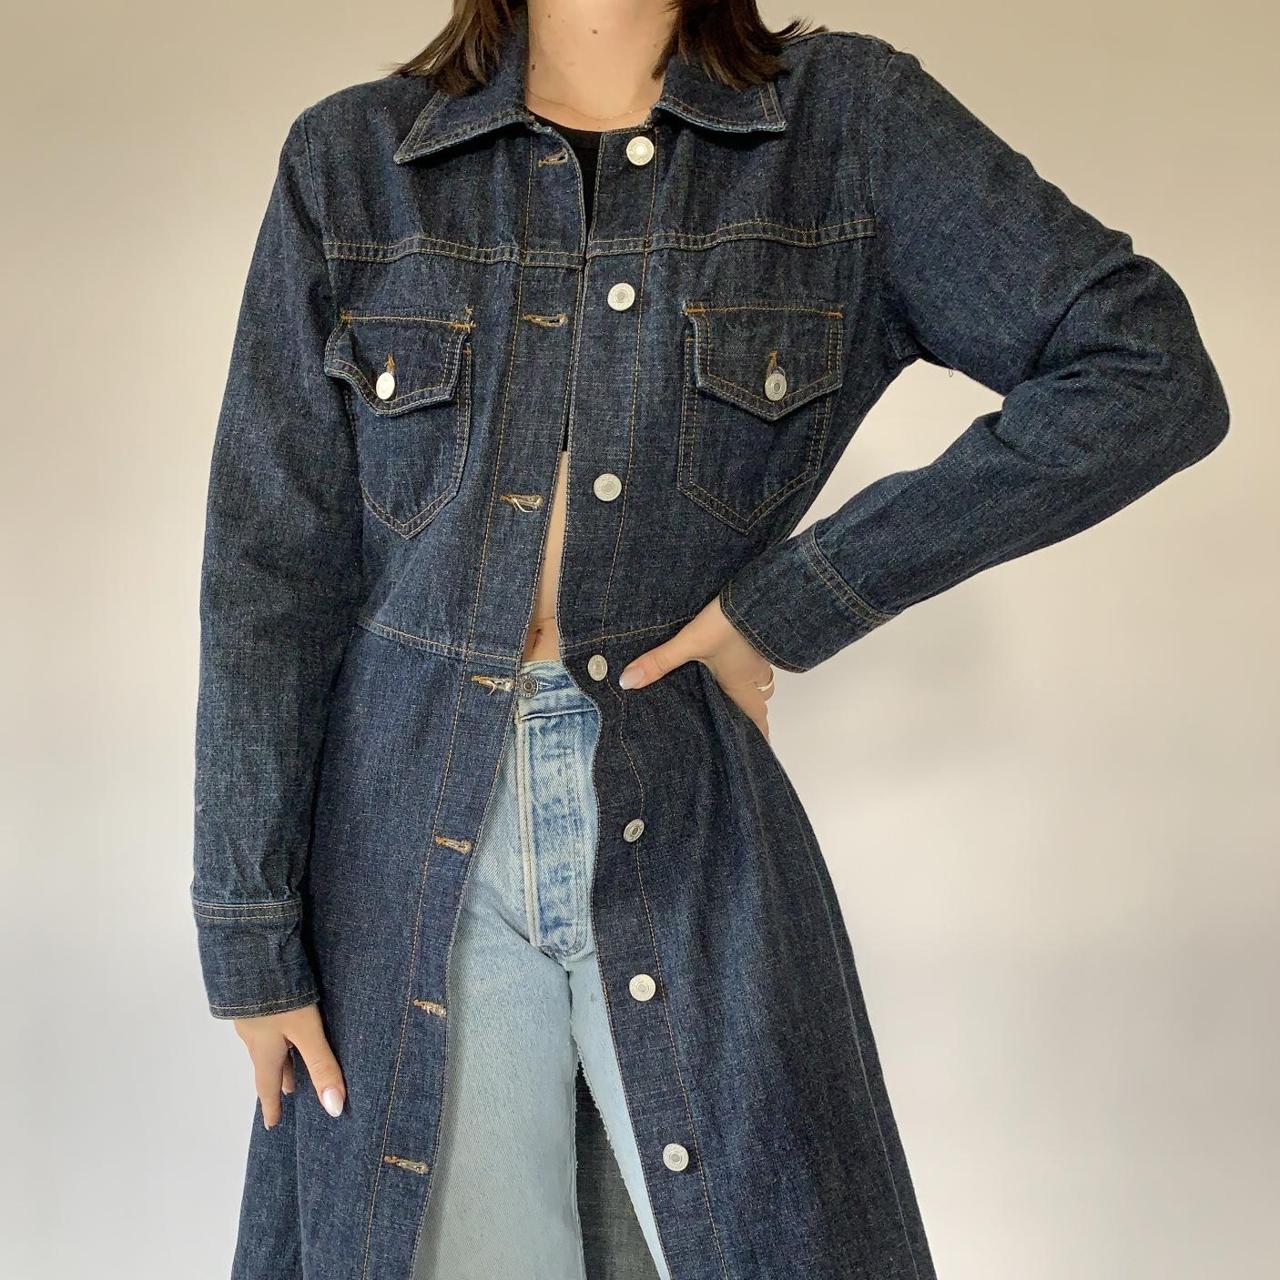 Kitsch Women's Navy and Blue Jacket